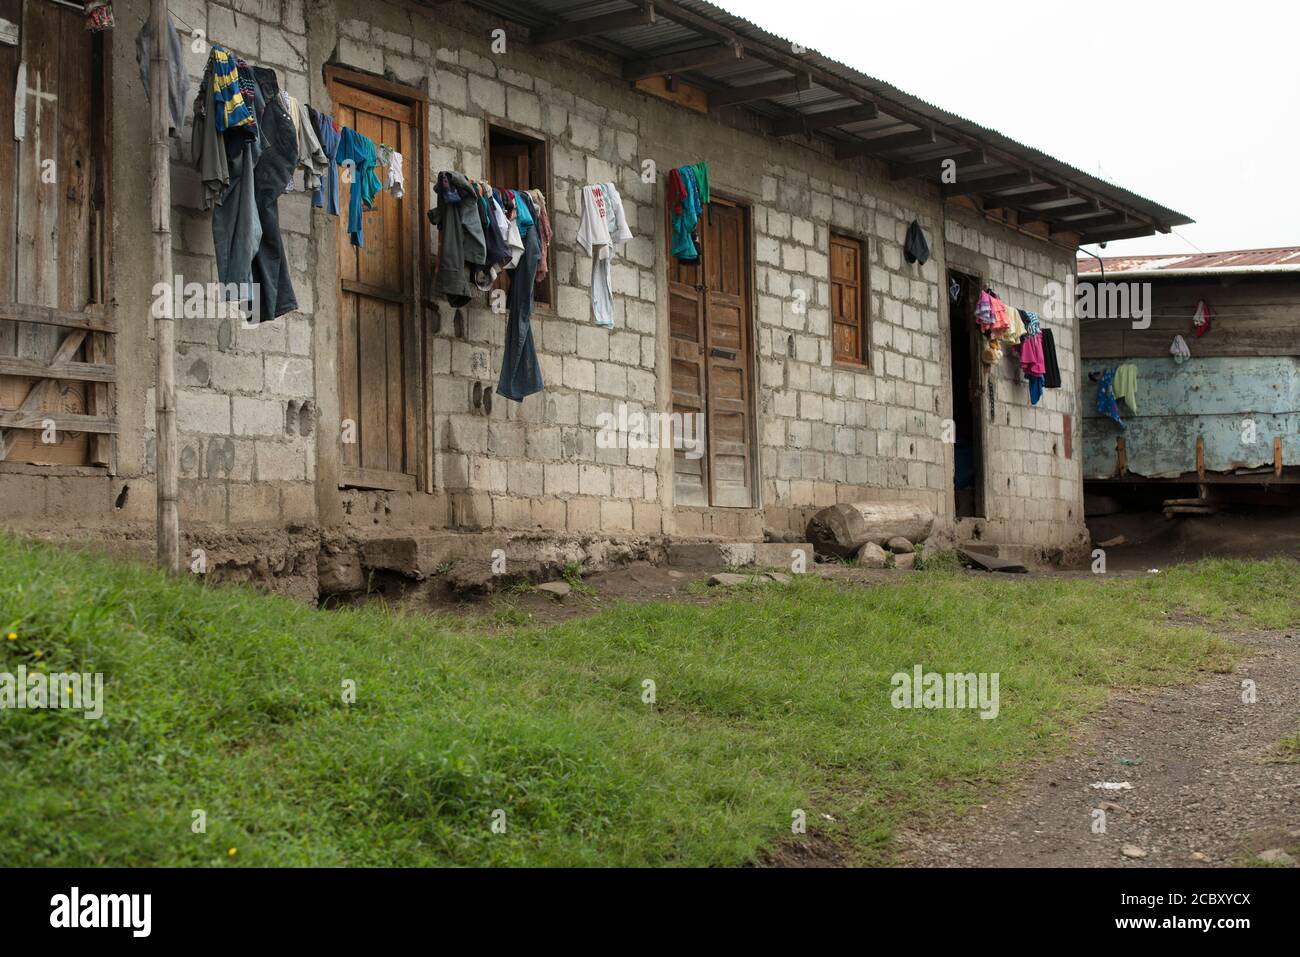 Housing provided for indigenous Ngäbe-Bugle seasonal, migrant agricultural laborers around Boquete, Panama. Stock Photo